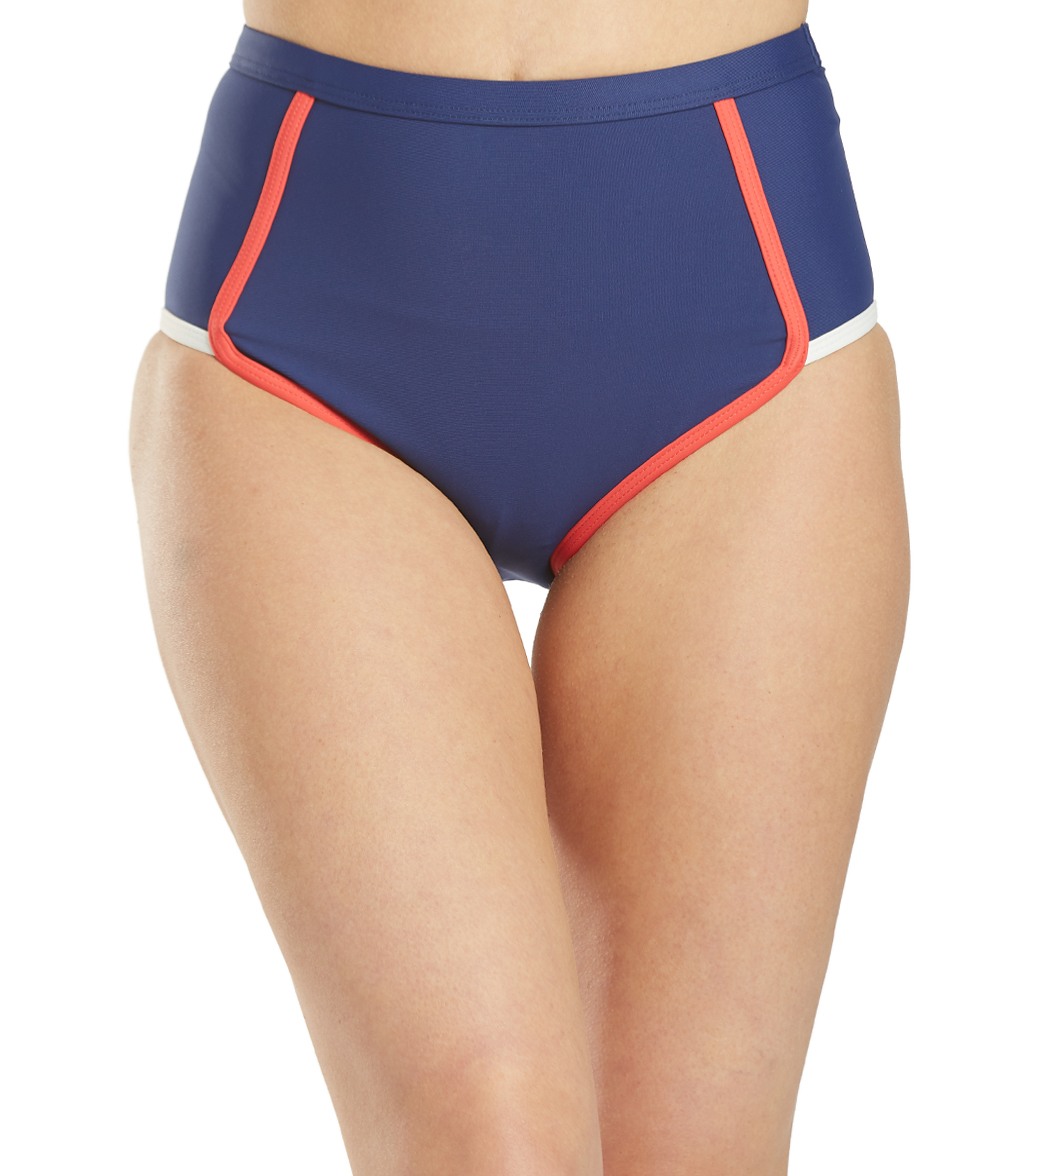 Next Coral Reef Elevate High Waisted Bikini Bottom - Navy Large - Swimoutlet.com